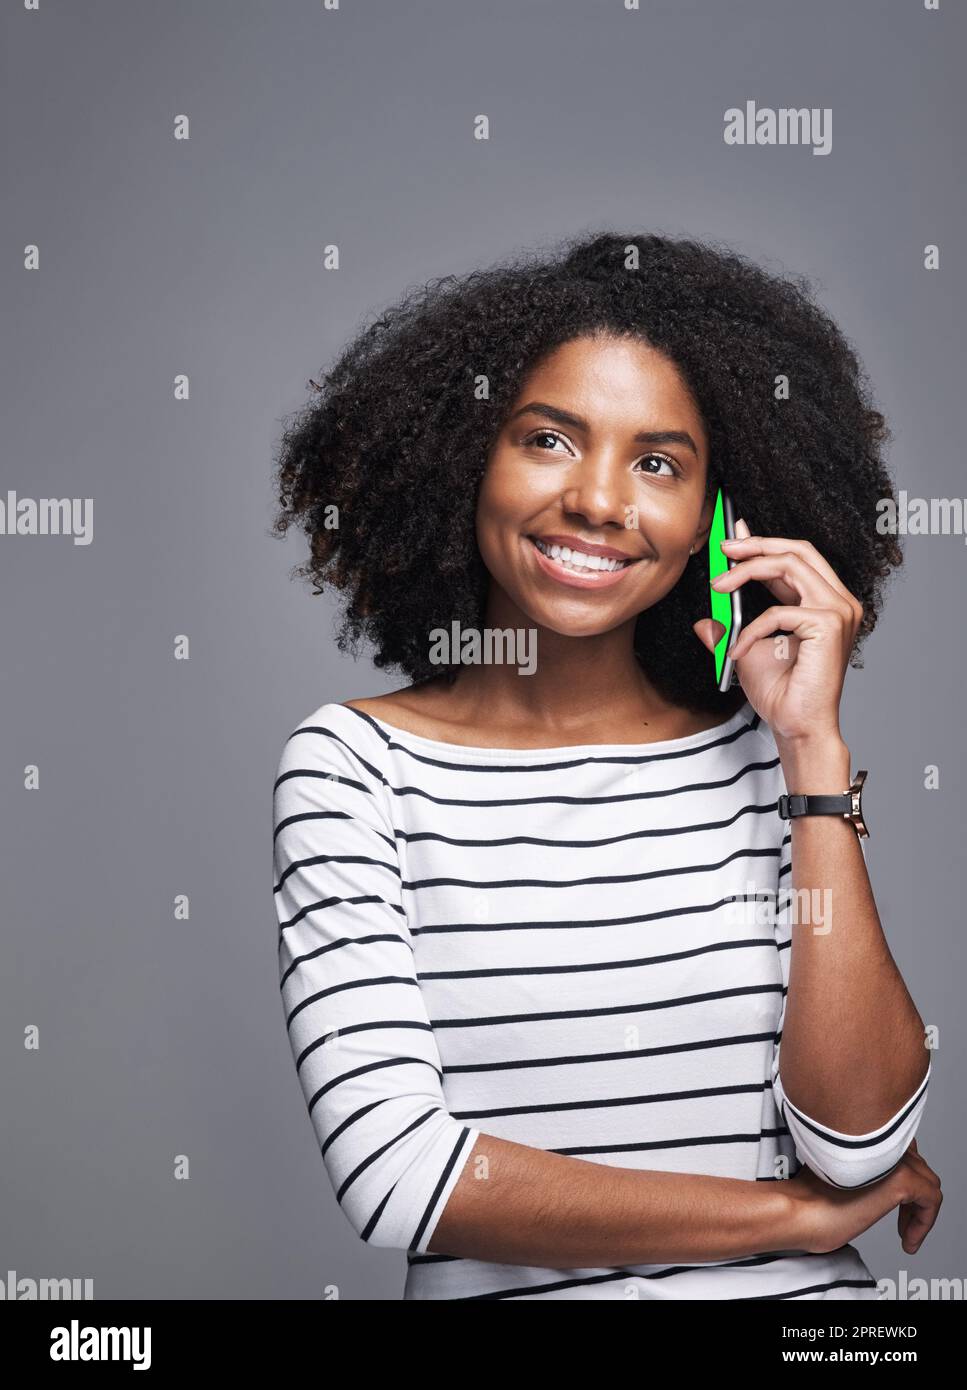 Sometimes a text message just wont cut it. Studio shot of a young woman using a mobile phone against a gray background. Stock Photo